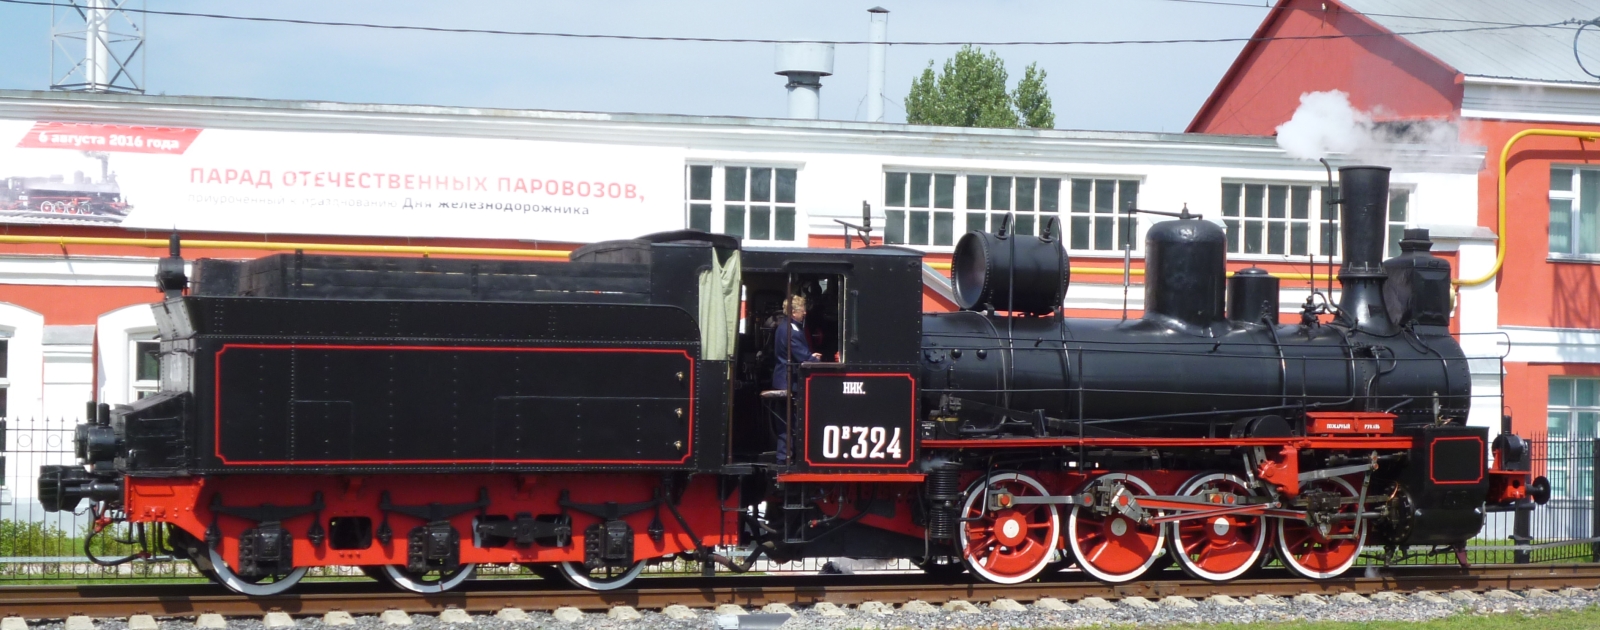 O<sub>в</sub> No. 324 in August 2015 at the Podmoskovnaya depot in Moscow